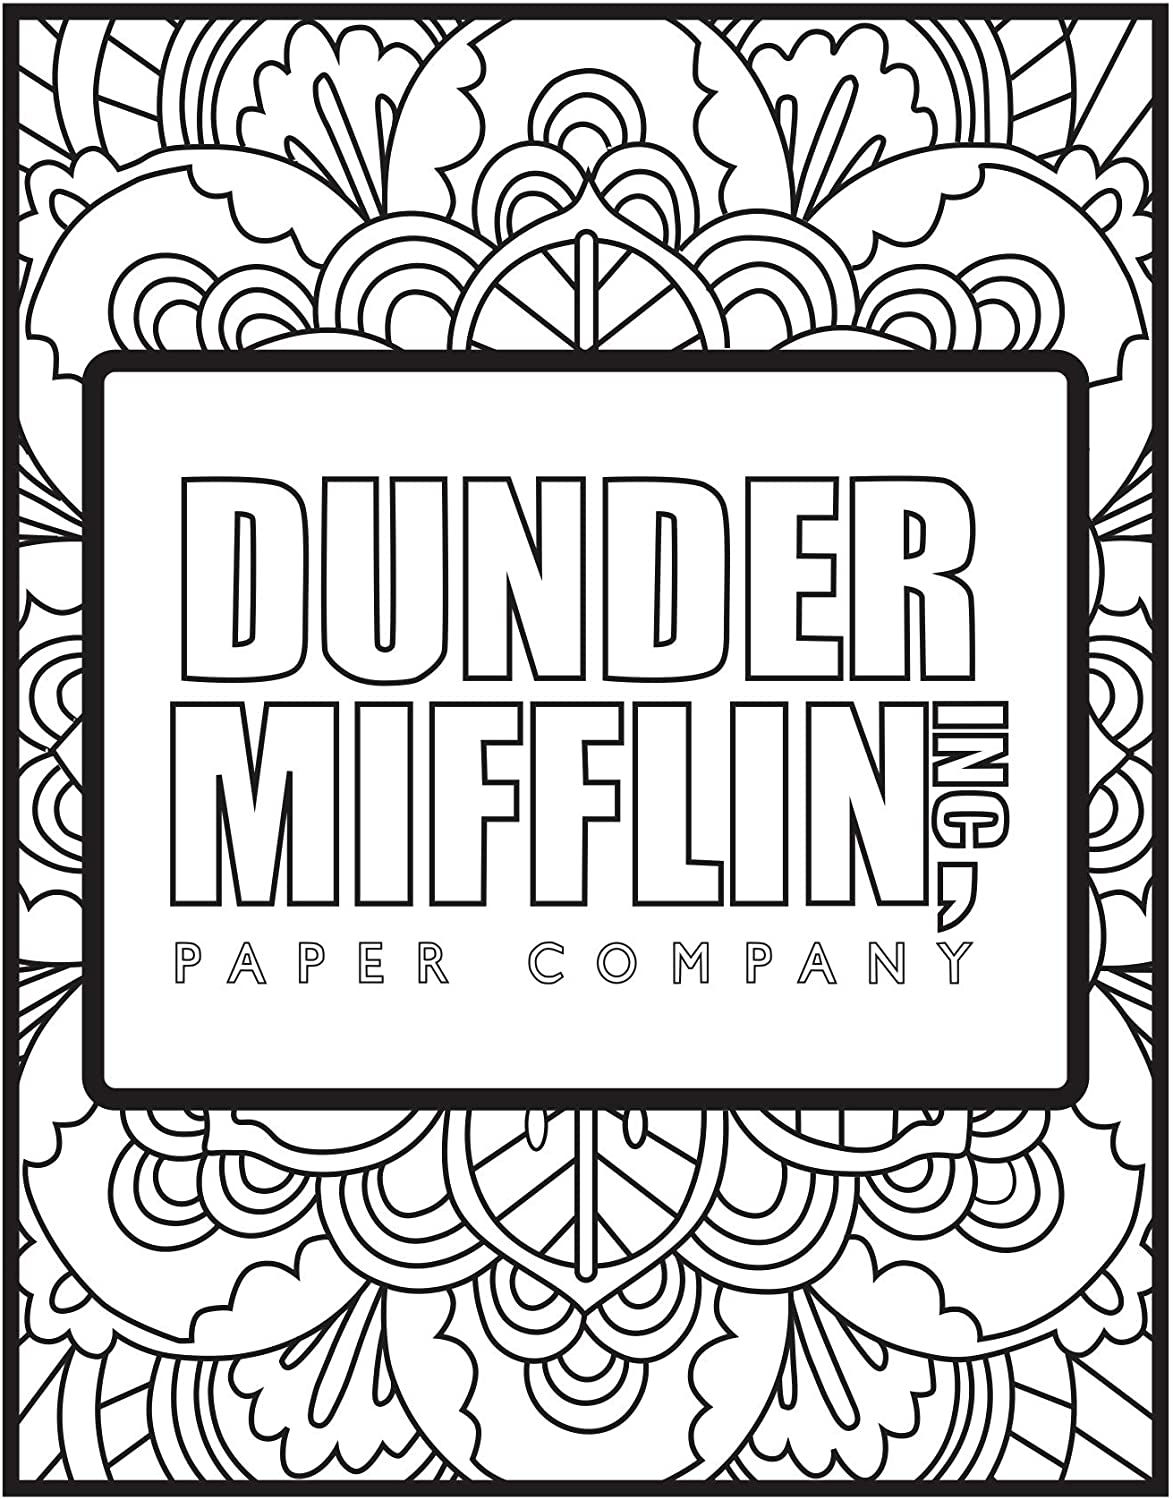 Amazon.com: 'The Office' Themed Coloring Pages (5 Pack): Arts ...